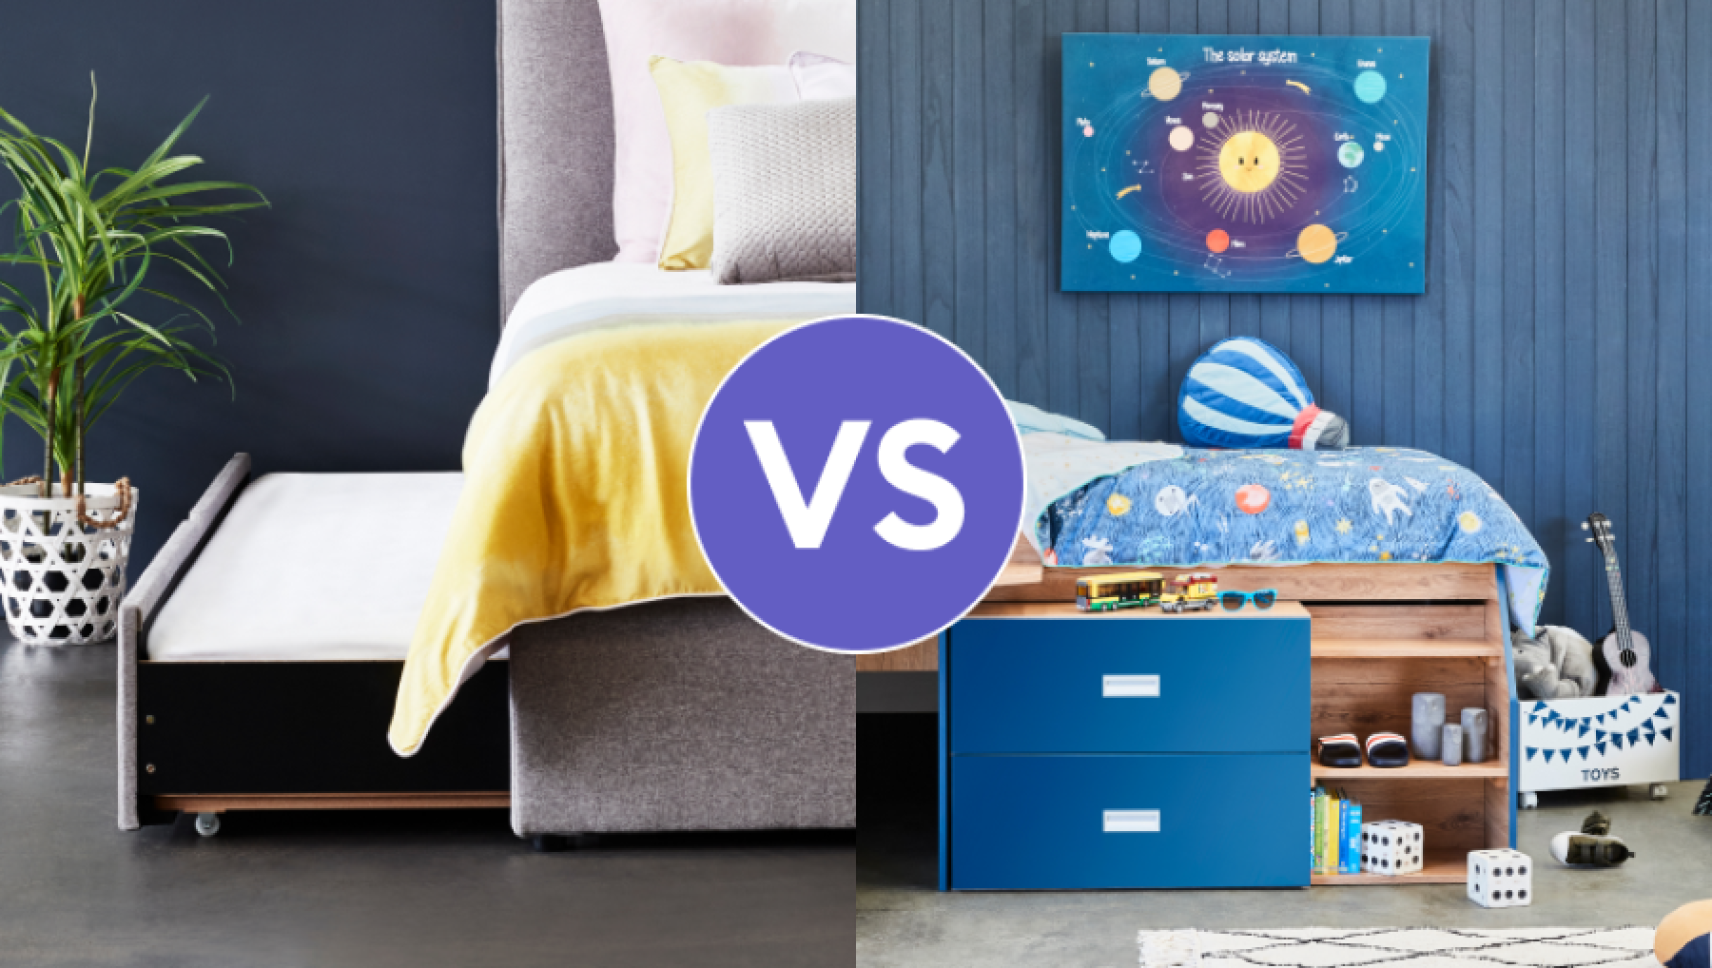 A comparison between a trundle bed and a midi bunk bed